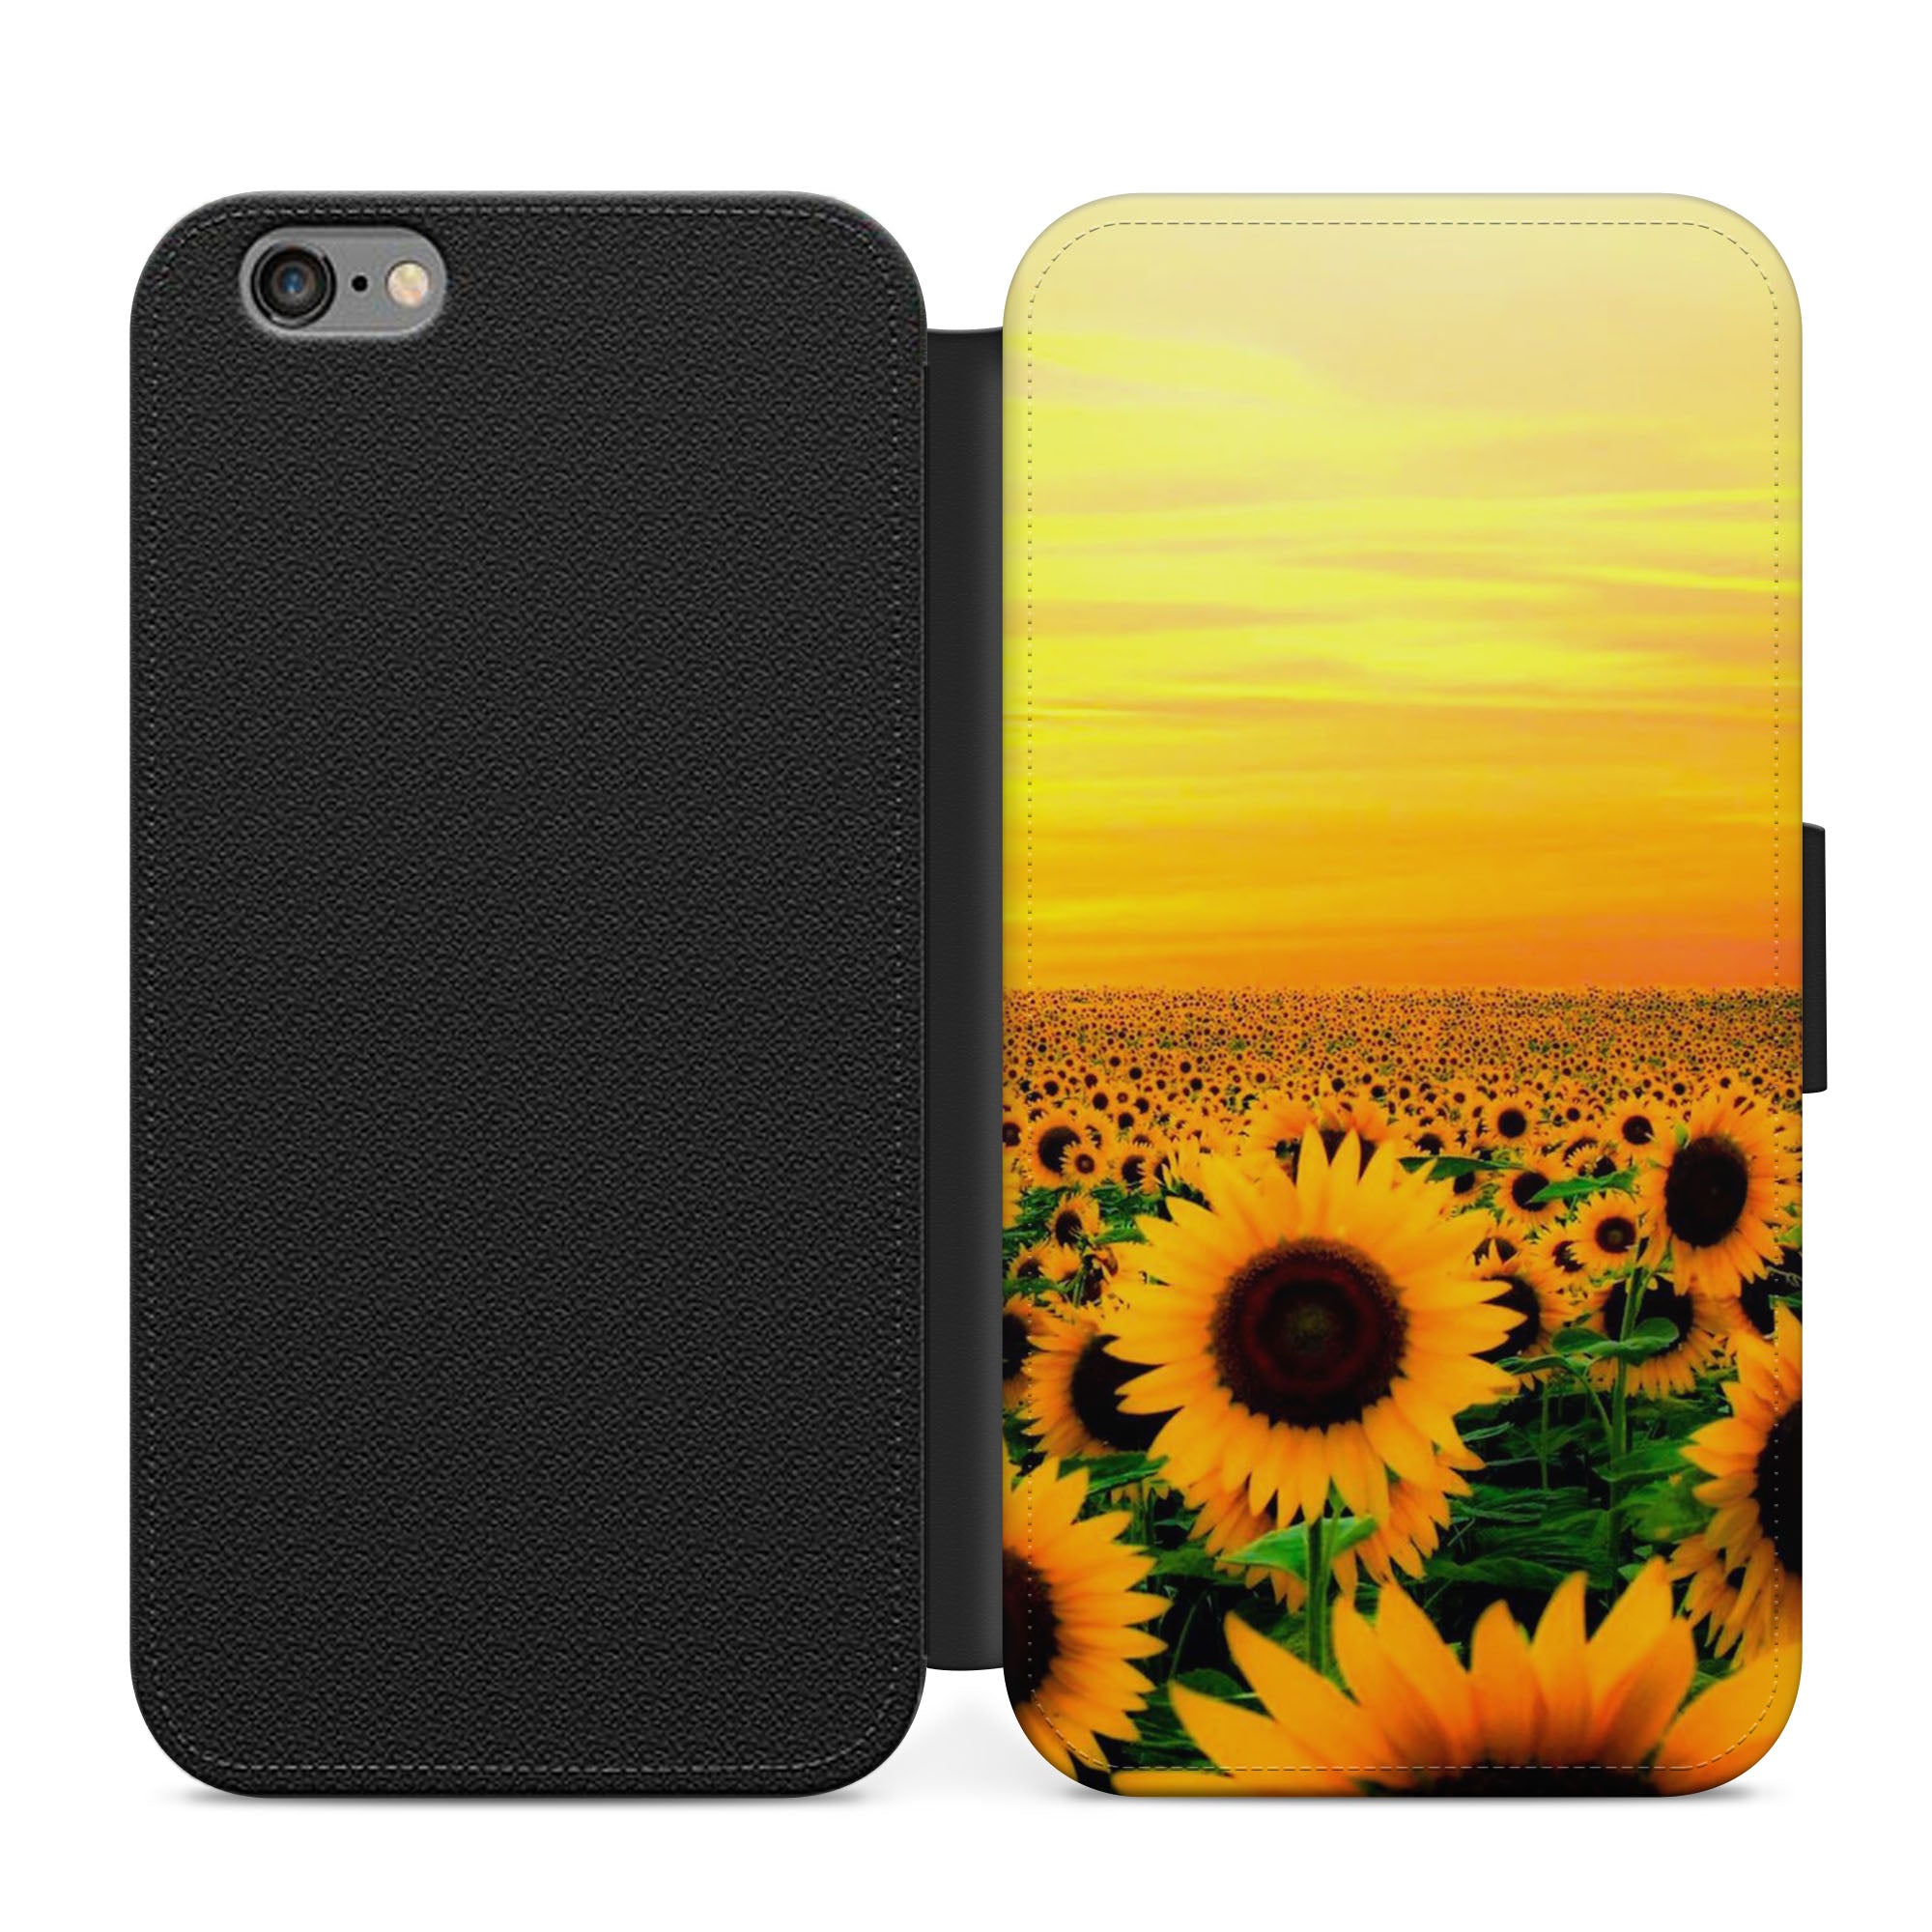 Sunflowers Faux Leather Flip Case Wallet for iPhone / Samsung